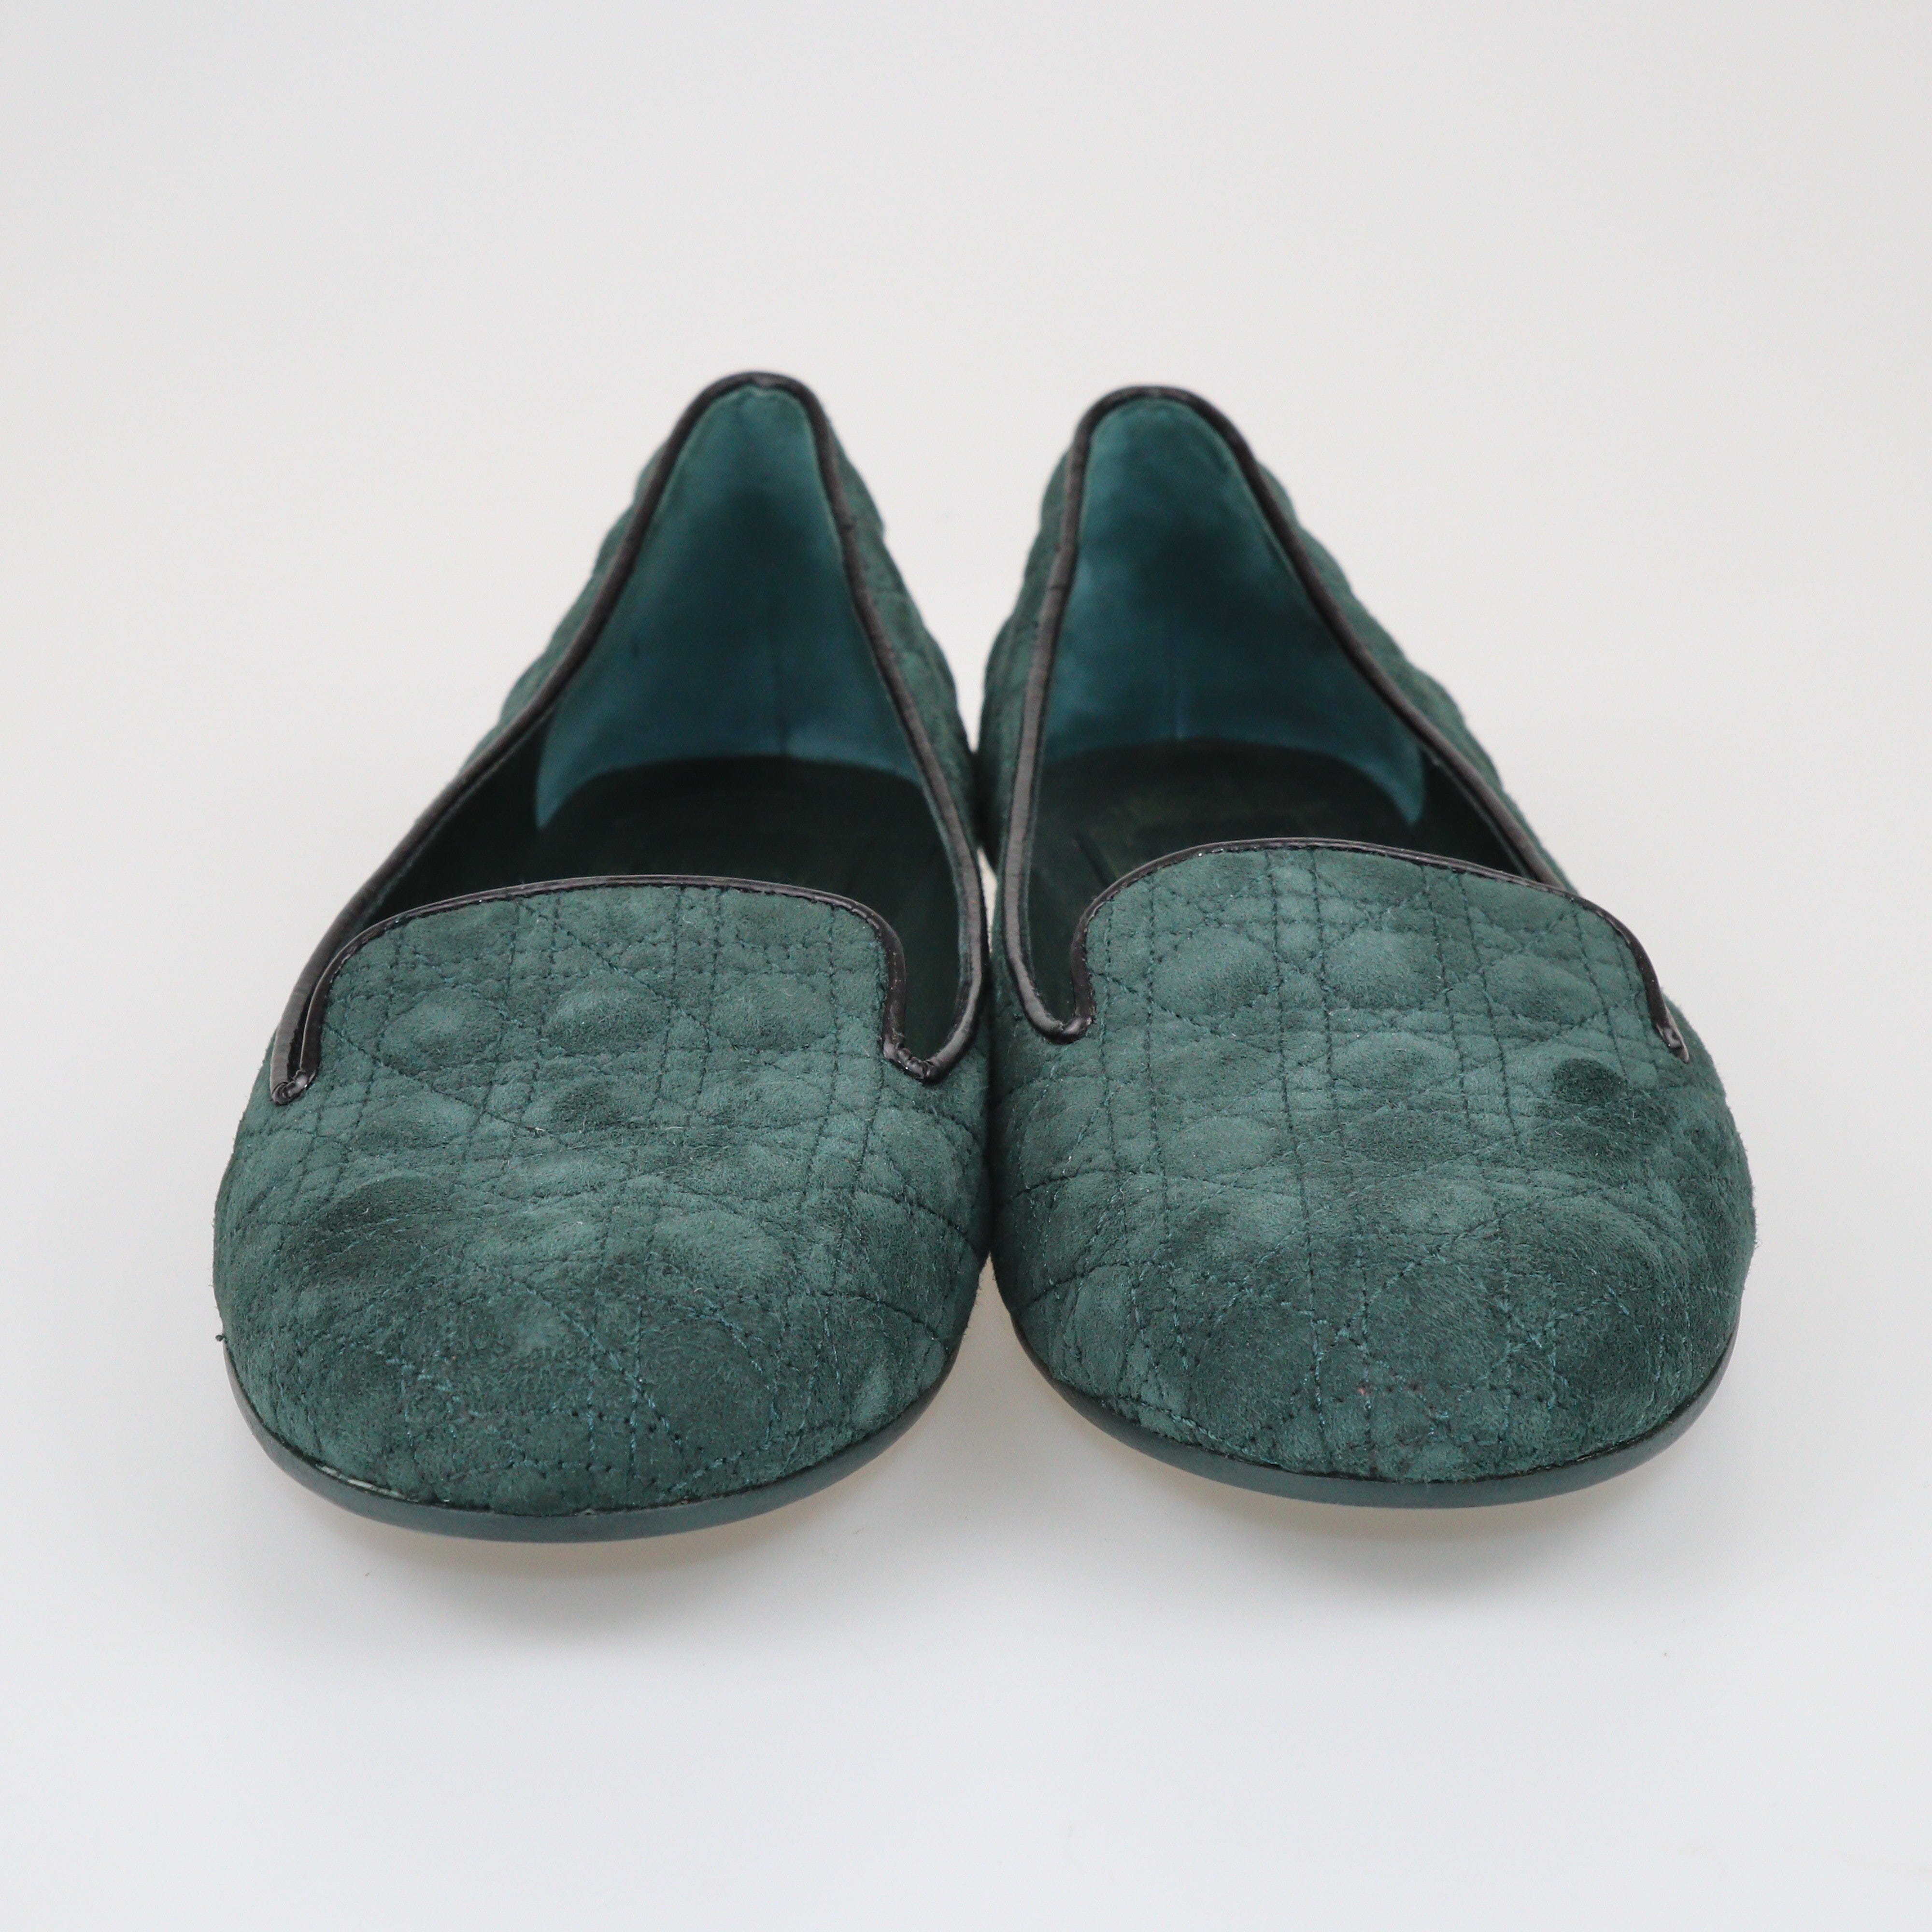 Dark Green Cannage Smoking Slippers Shoes Christian Dior 